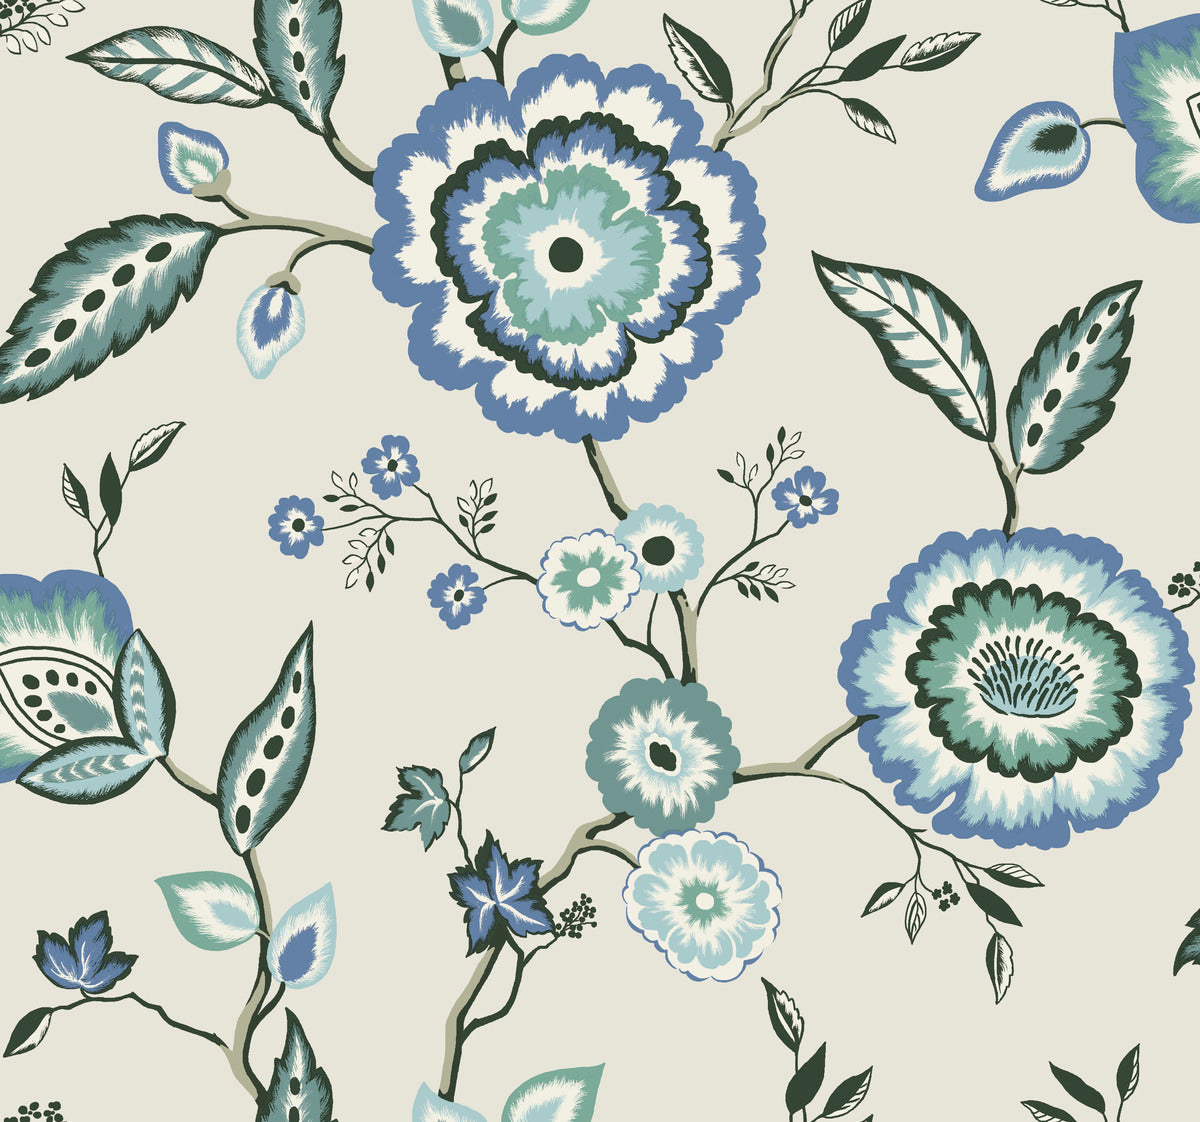 A seamless pattern featuring large, stylized Dahlia Blooms in shades of blue and green with intricate petal details and flowing stems with leaves and buds, set against a light beige background. This Dahlia Blooms Midnight/Multi Wallpaper Black, Pink (60 Sq.Ft.) by York Wallcoverings embodies vintage botanical elegance while offering easy installation and removal.